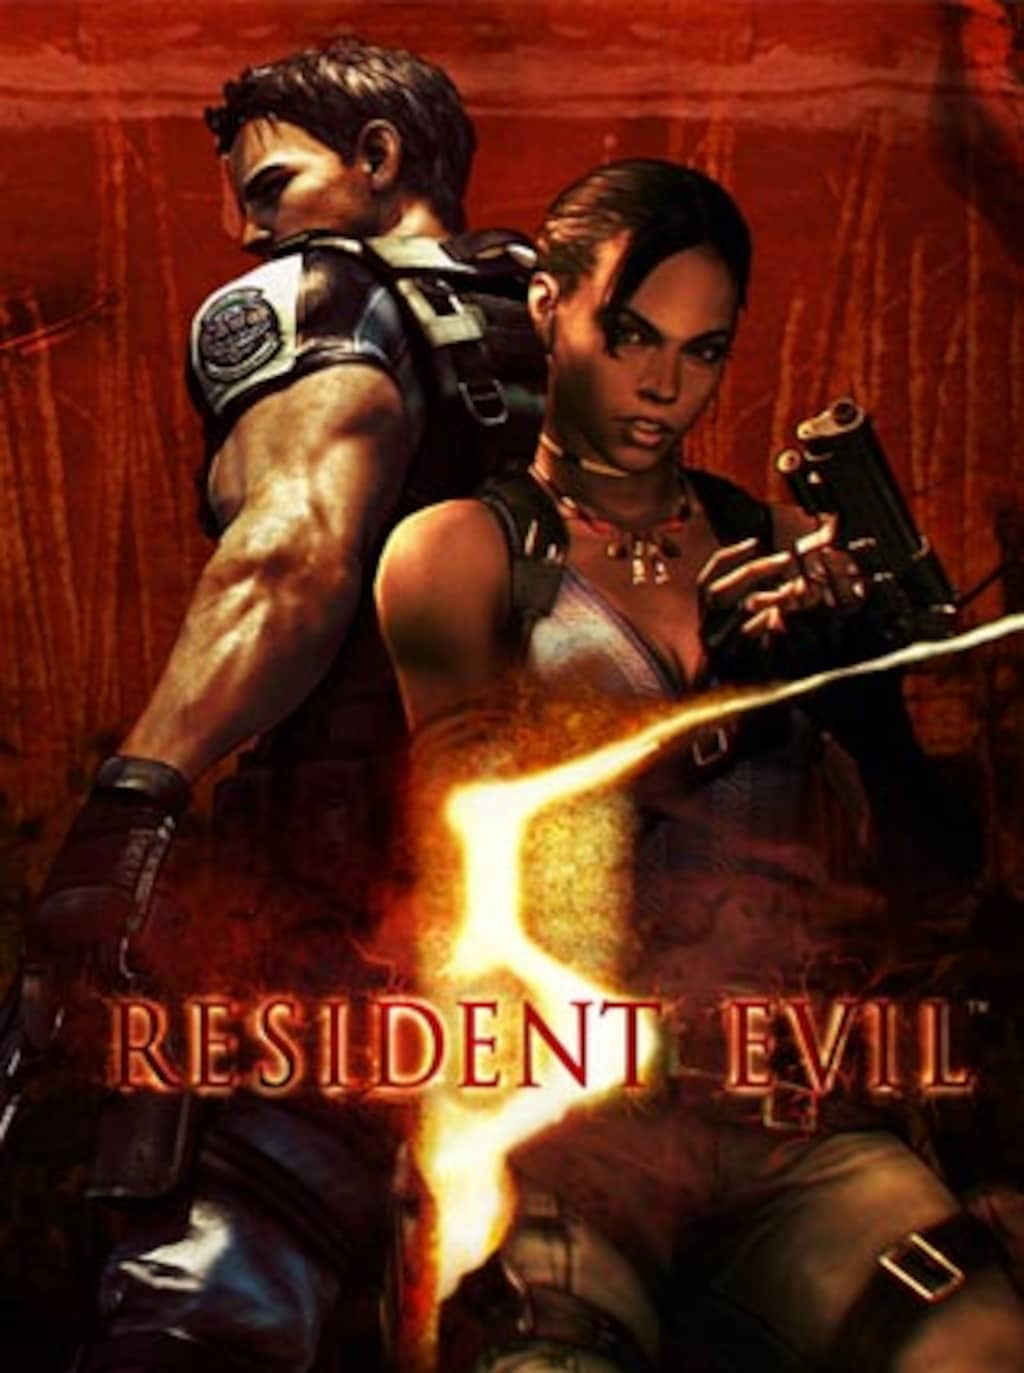 Buy RESIDENT EVIL 2 / BIOHAZARD RE:2 Deluxe Edition from the Humble Store  and save 75%